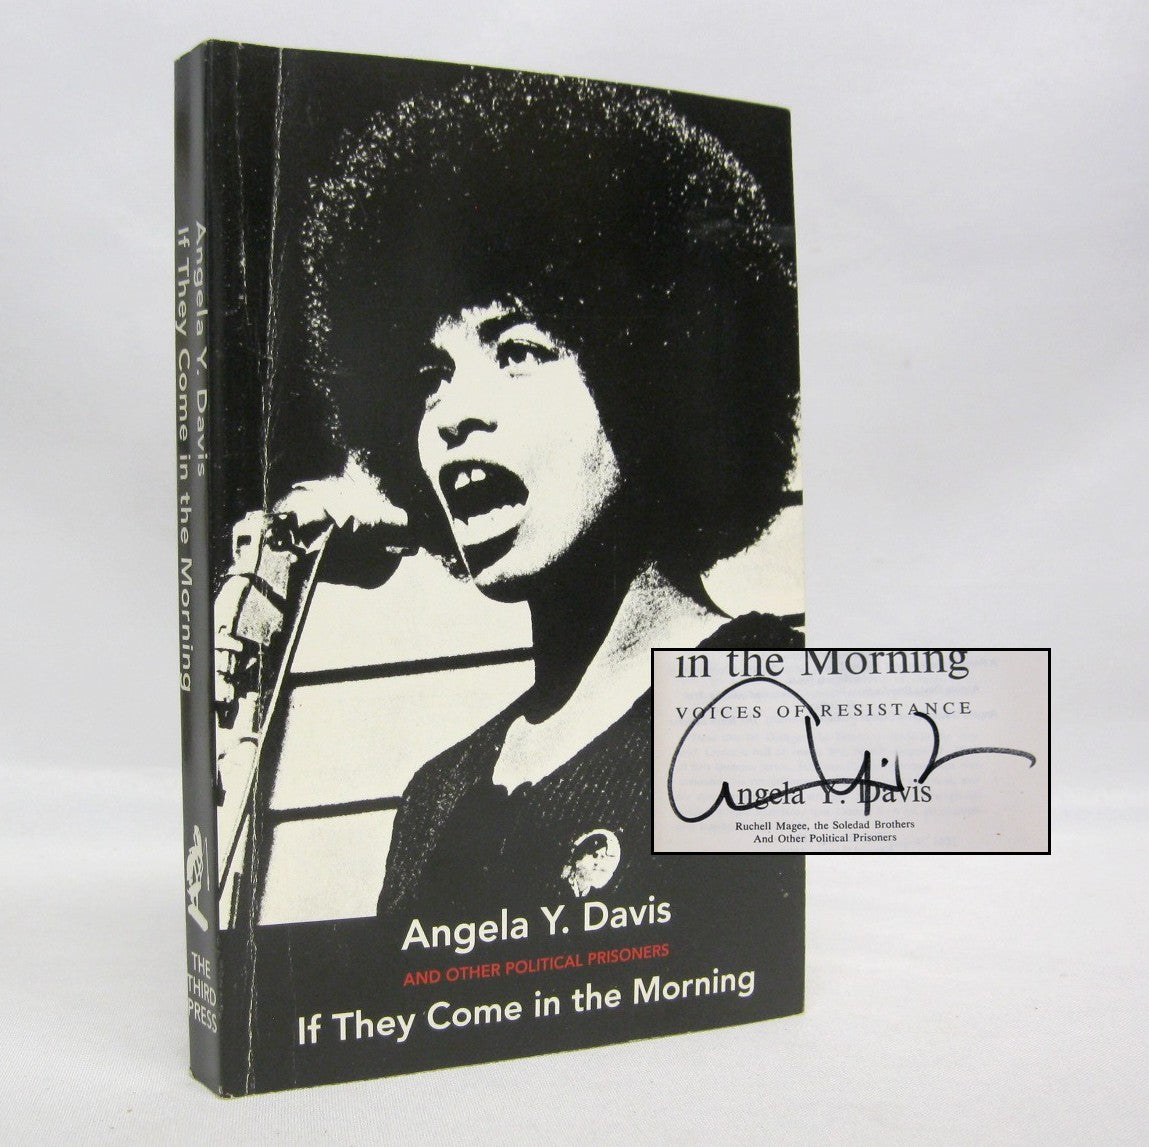 If They Come In The Morning by Angela Y. Davis